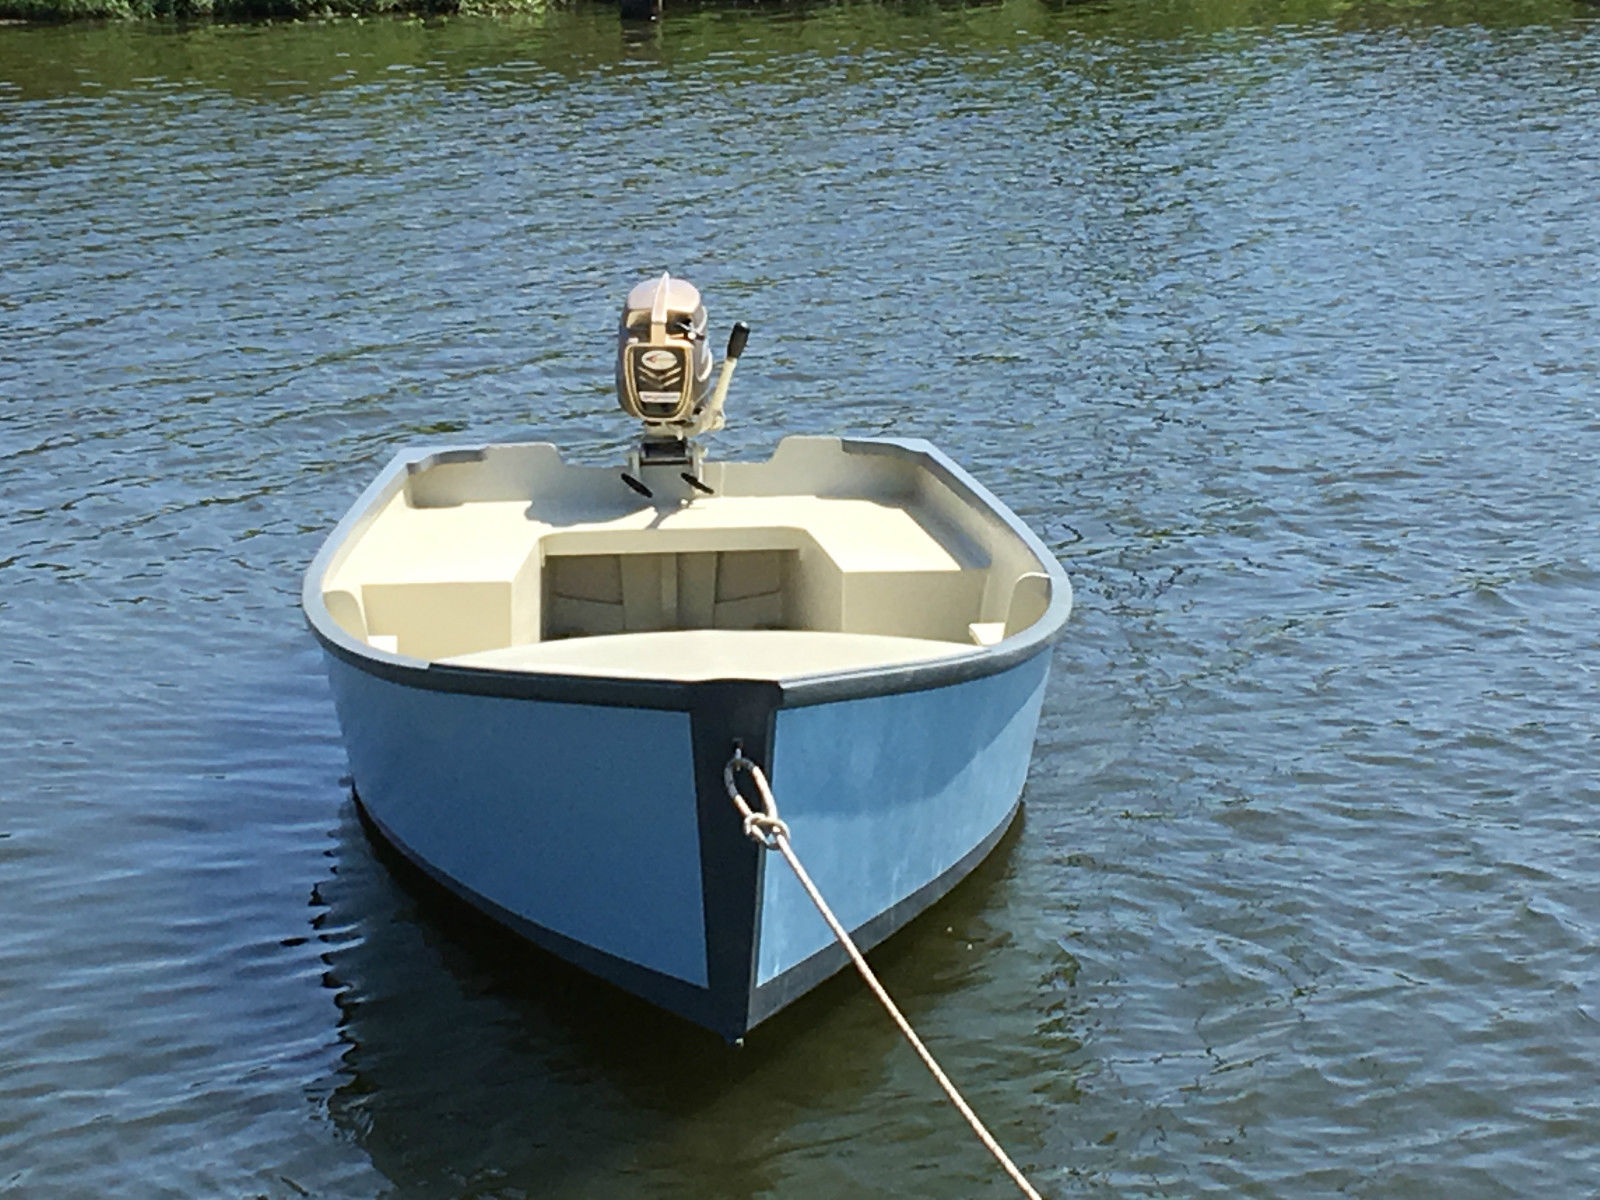 harkers island skiff 1969 for sale for $2,000 - boats-from